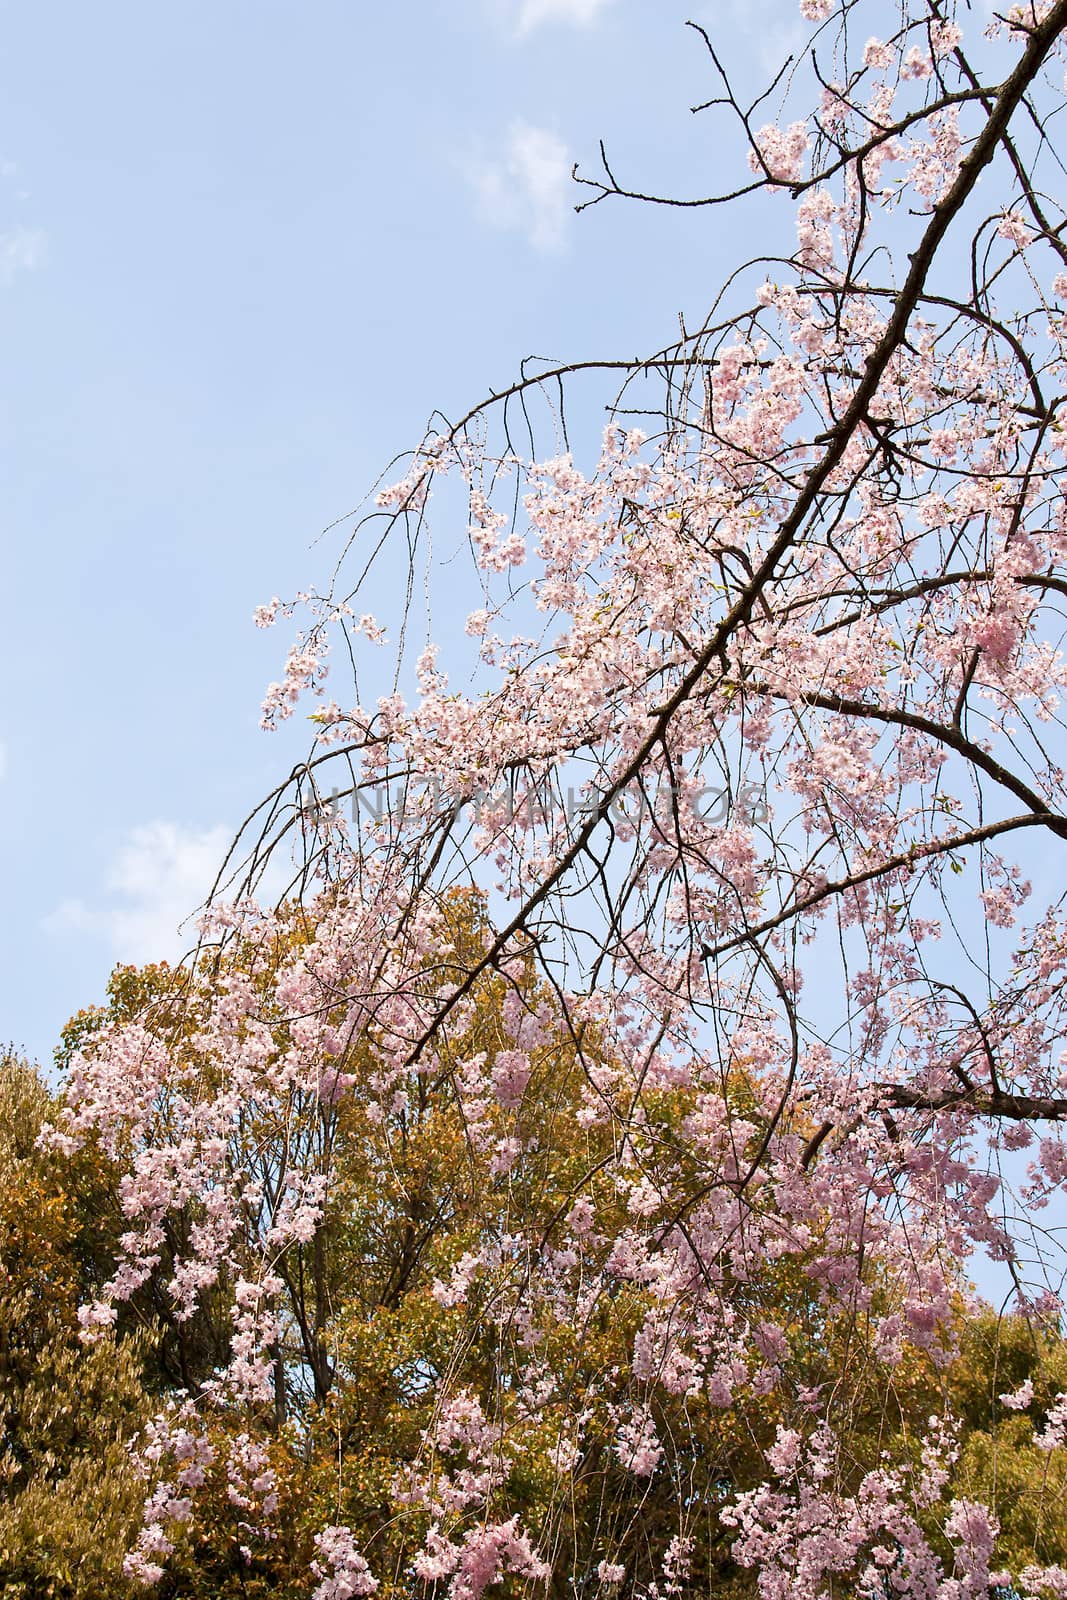 Sakura branch and flowers blooming blossom on sky background